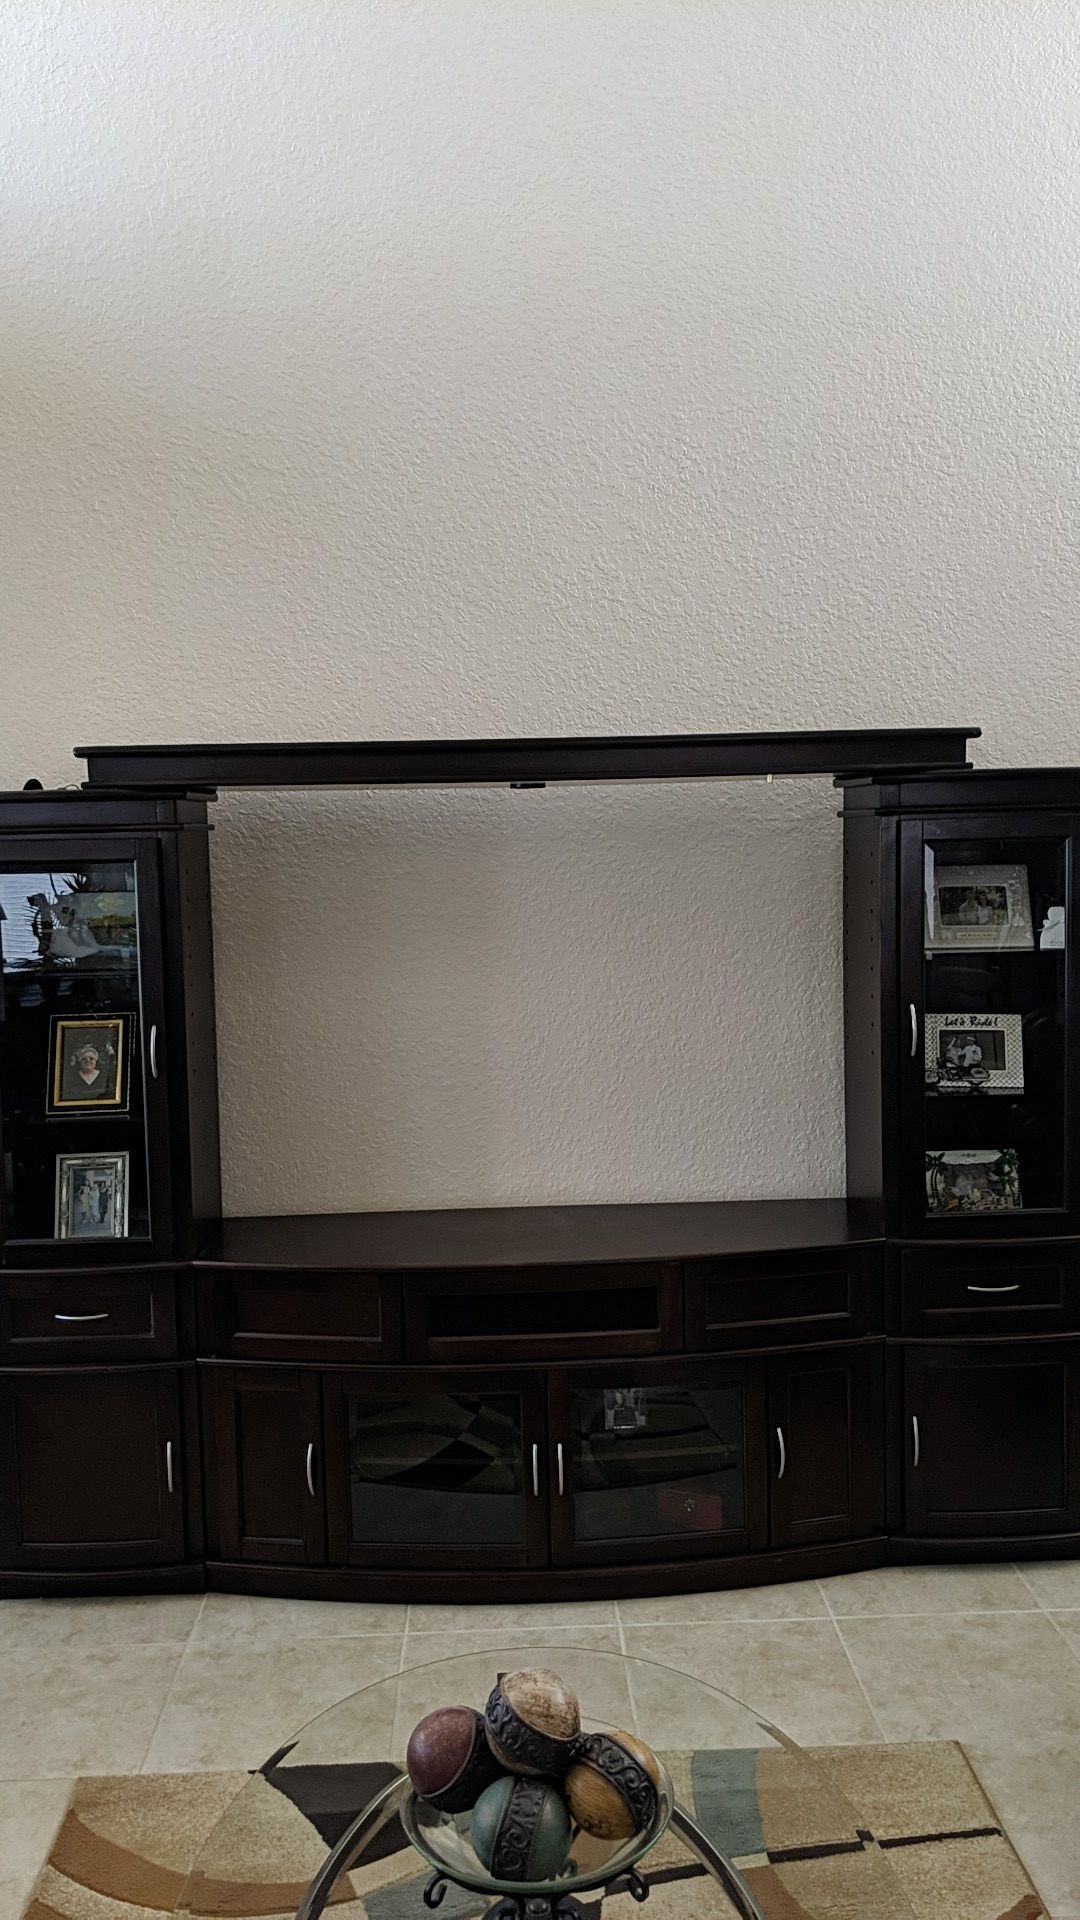 Entertainment center, lighted. Price lowered to $600! Must go!